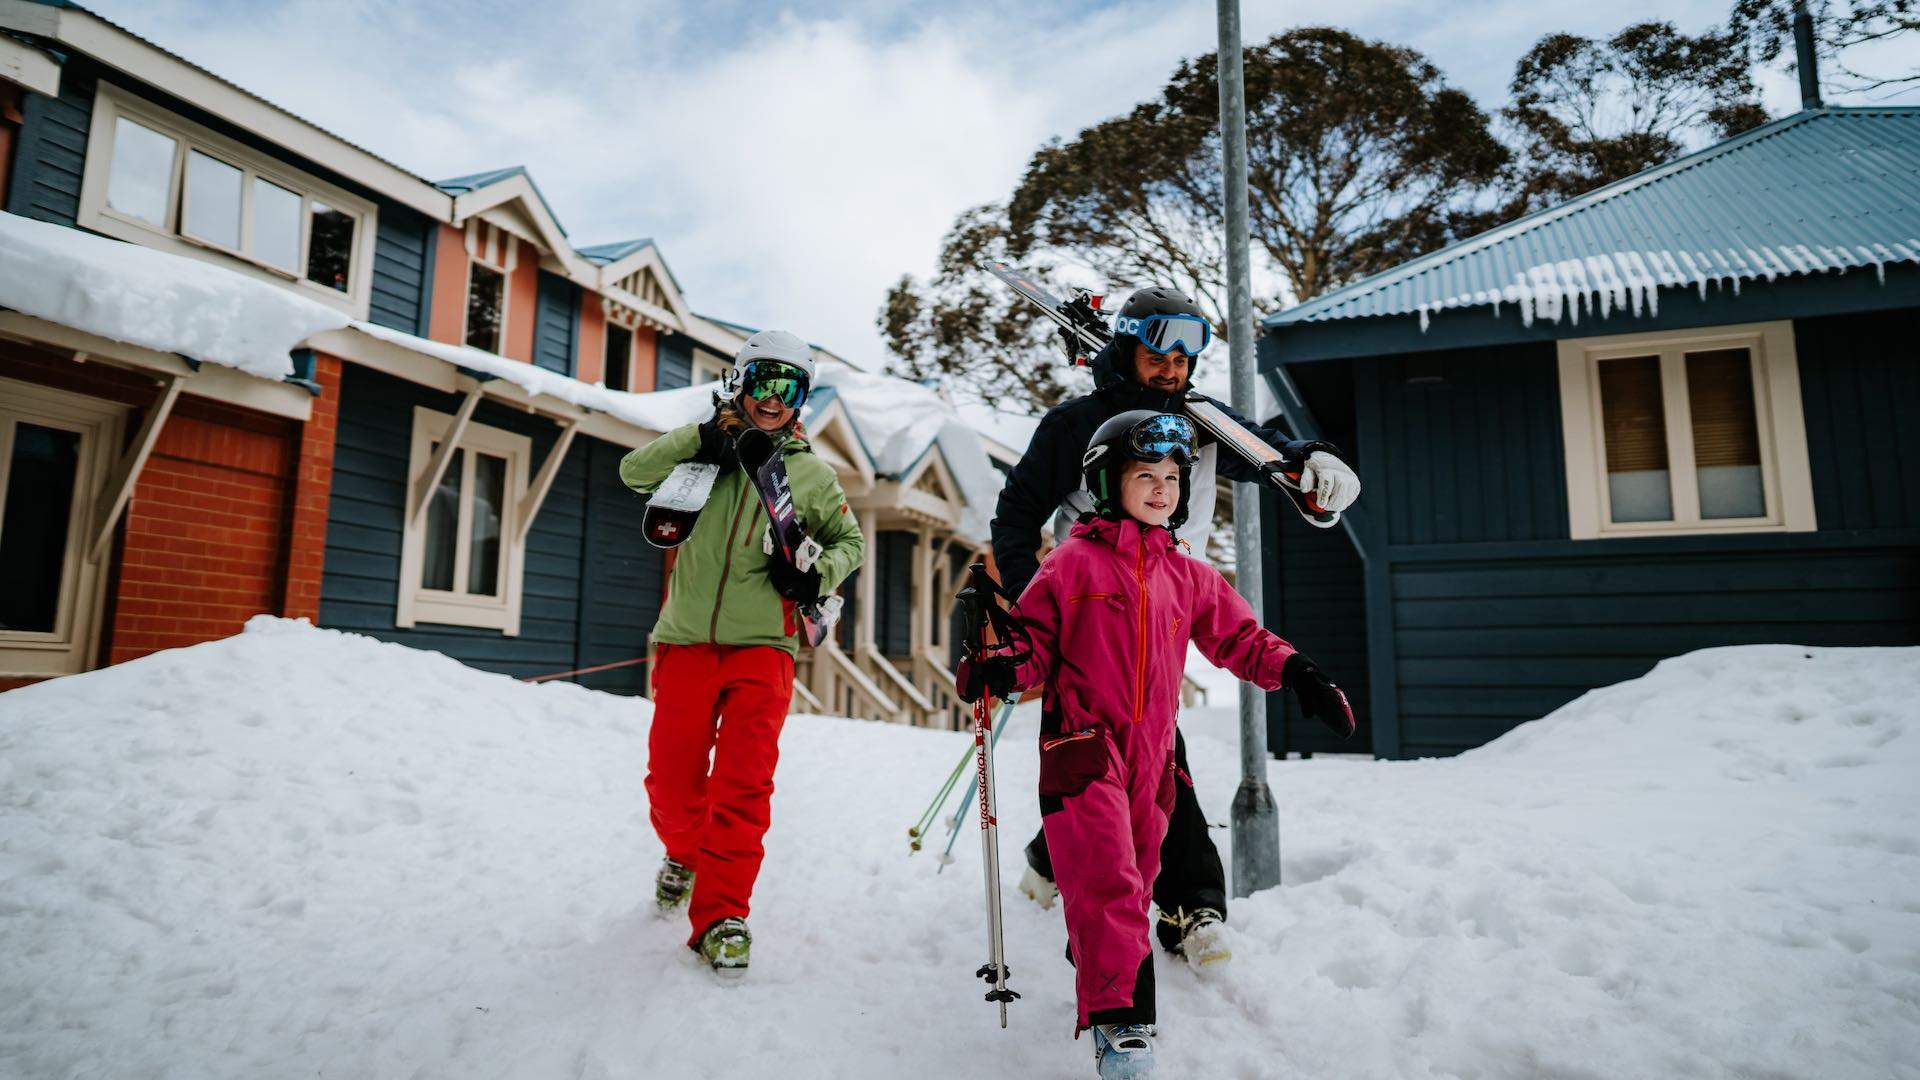 On Top of the Country: How to Explore Australia's Highest Altitude Ski Village From Sunrise to Sunset